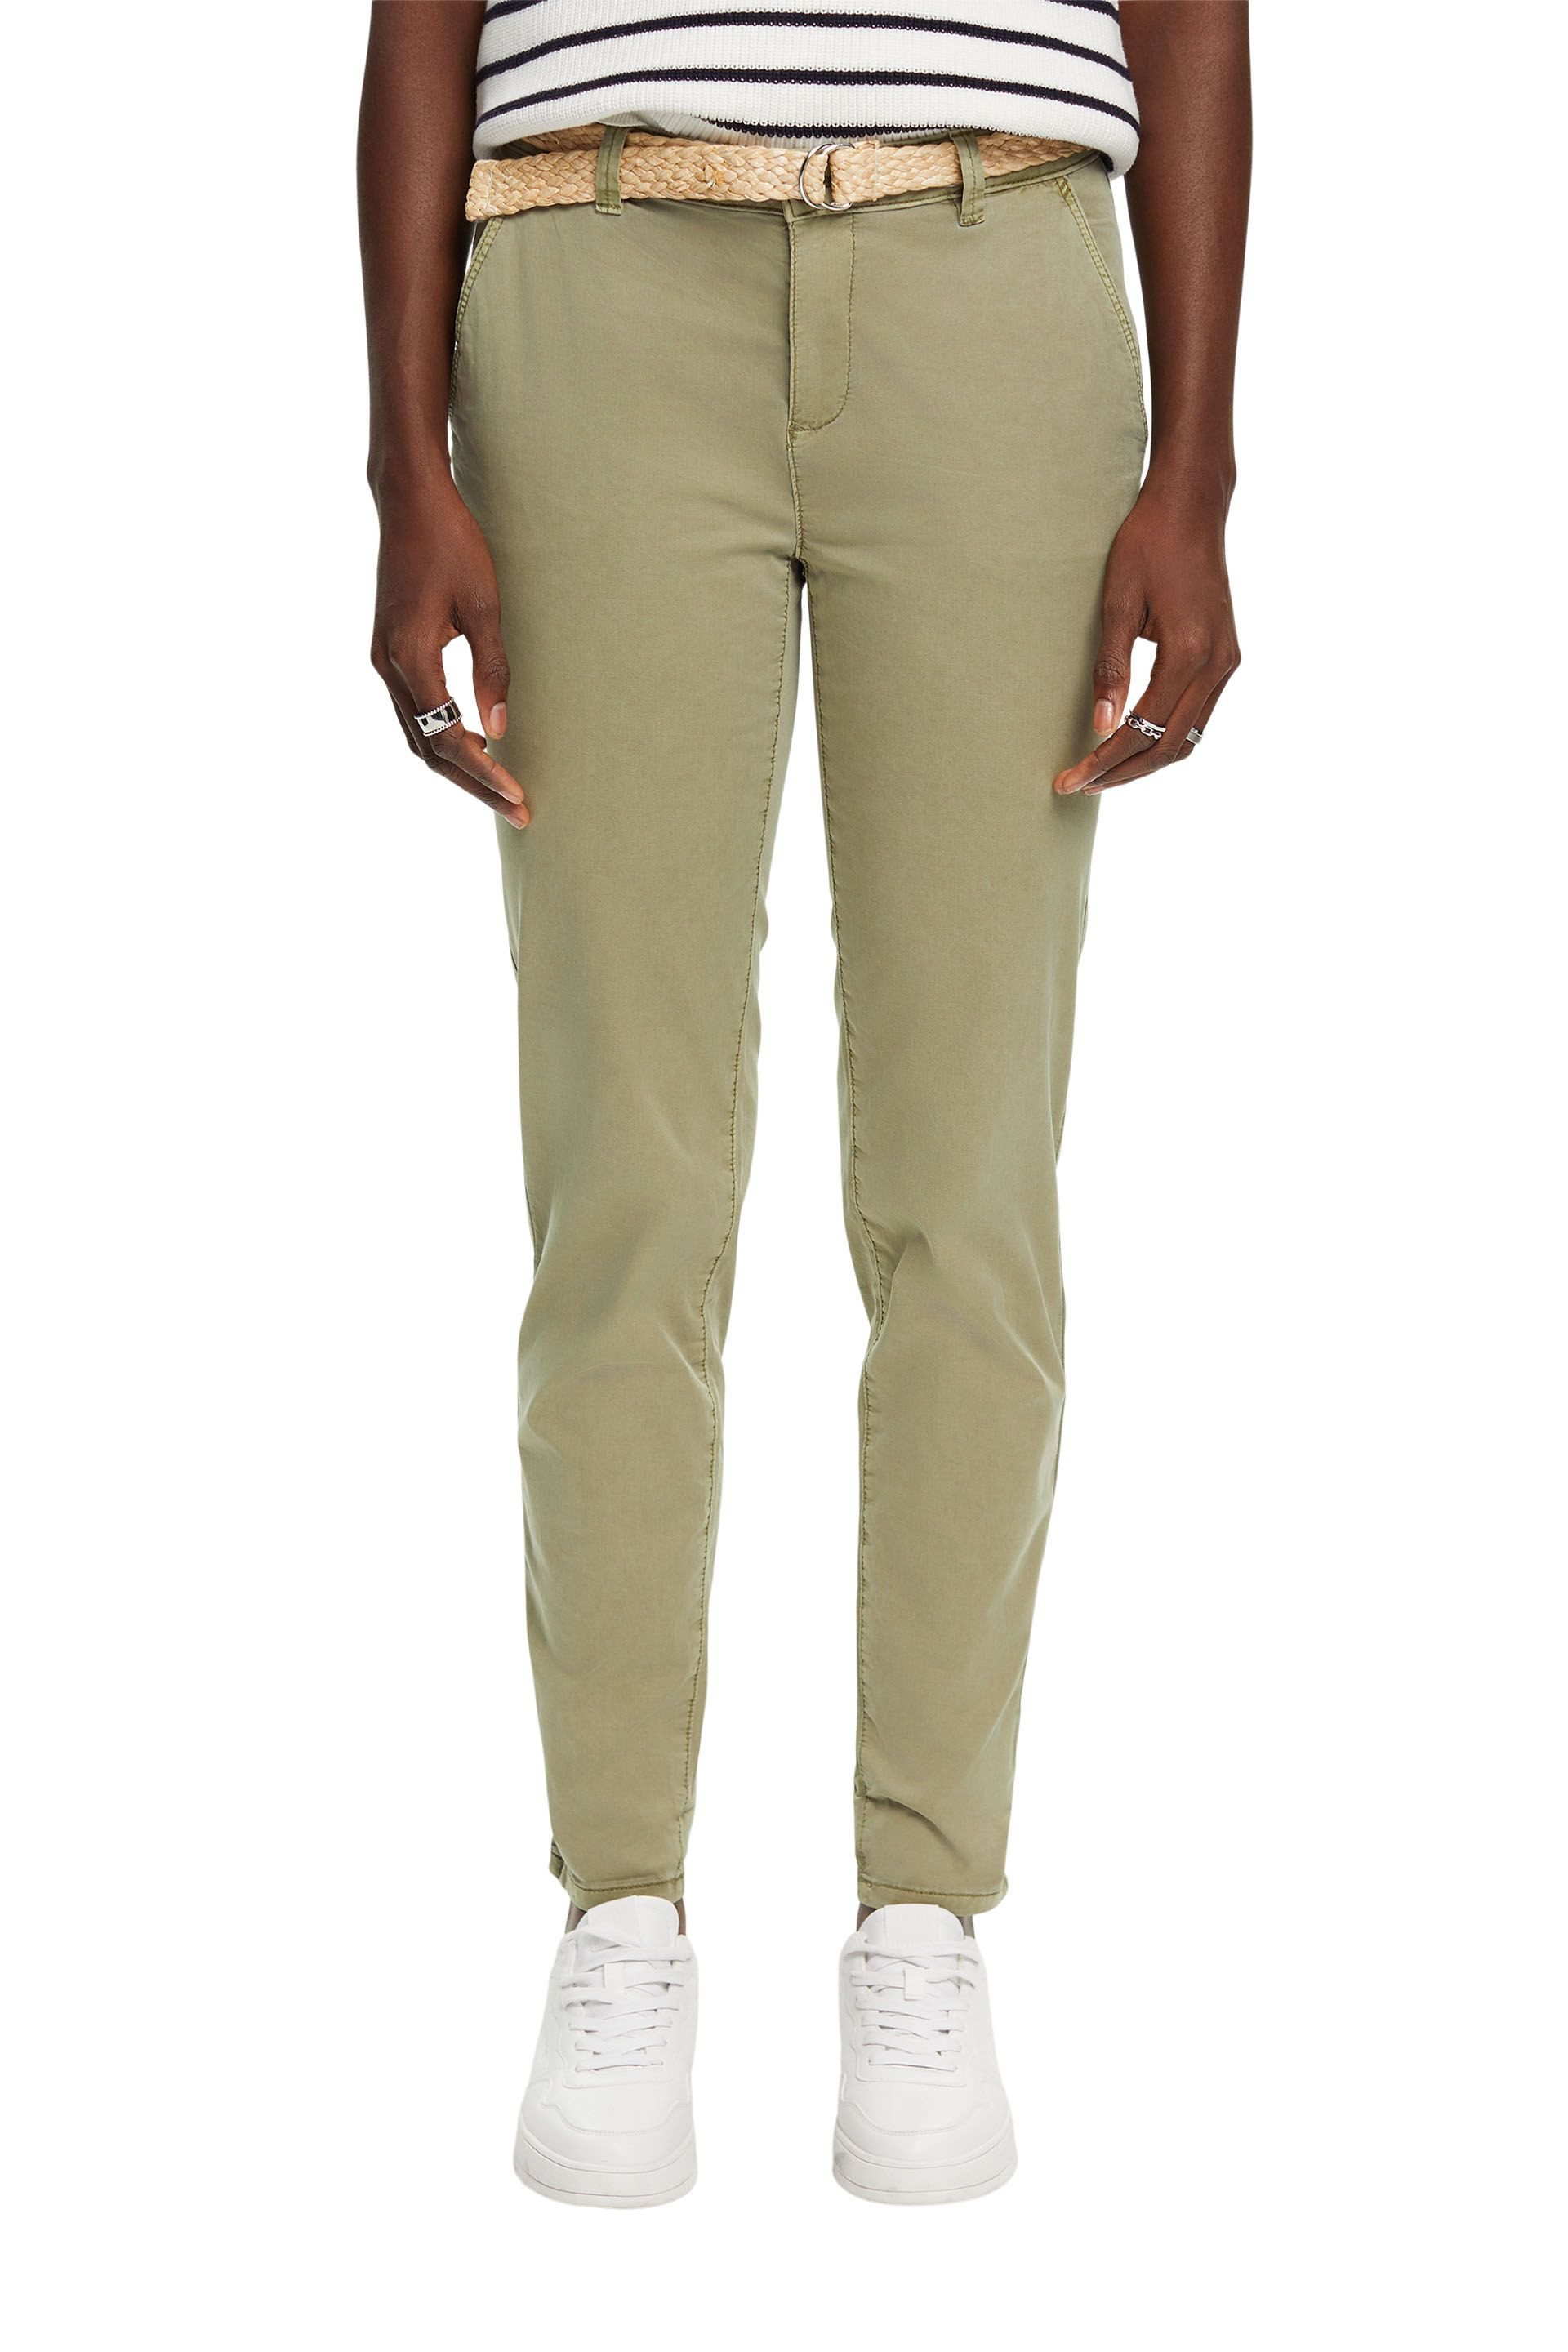 Esprit - Cropped chinos with belt, Sage Green, large image number 1